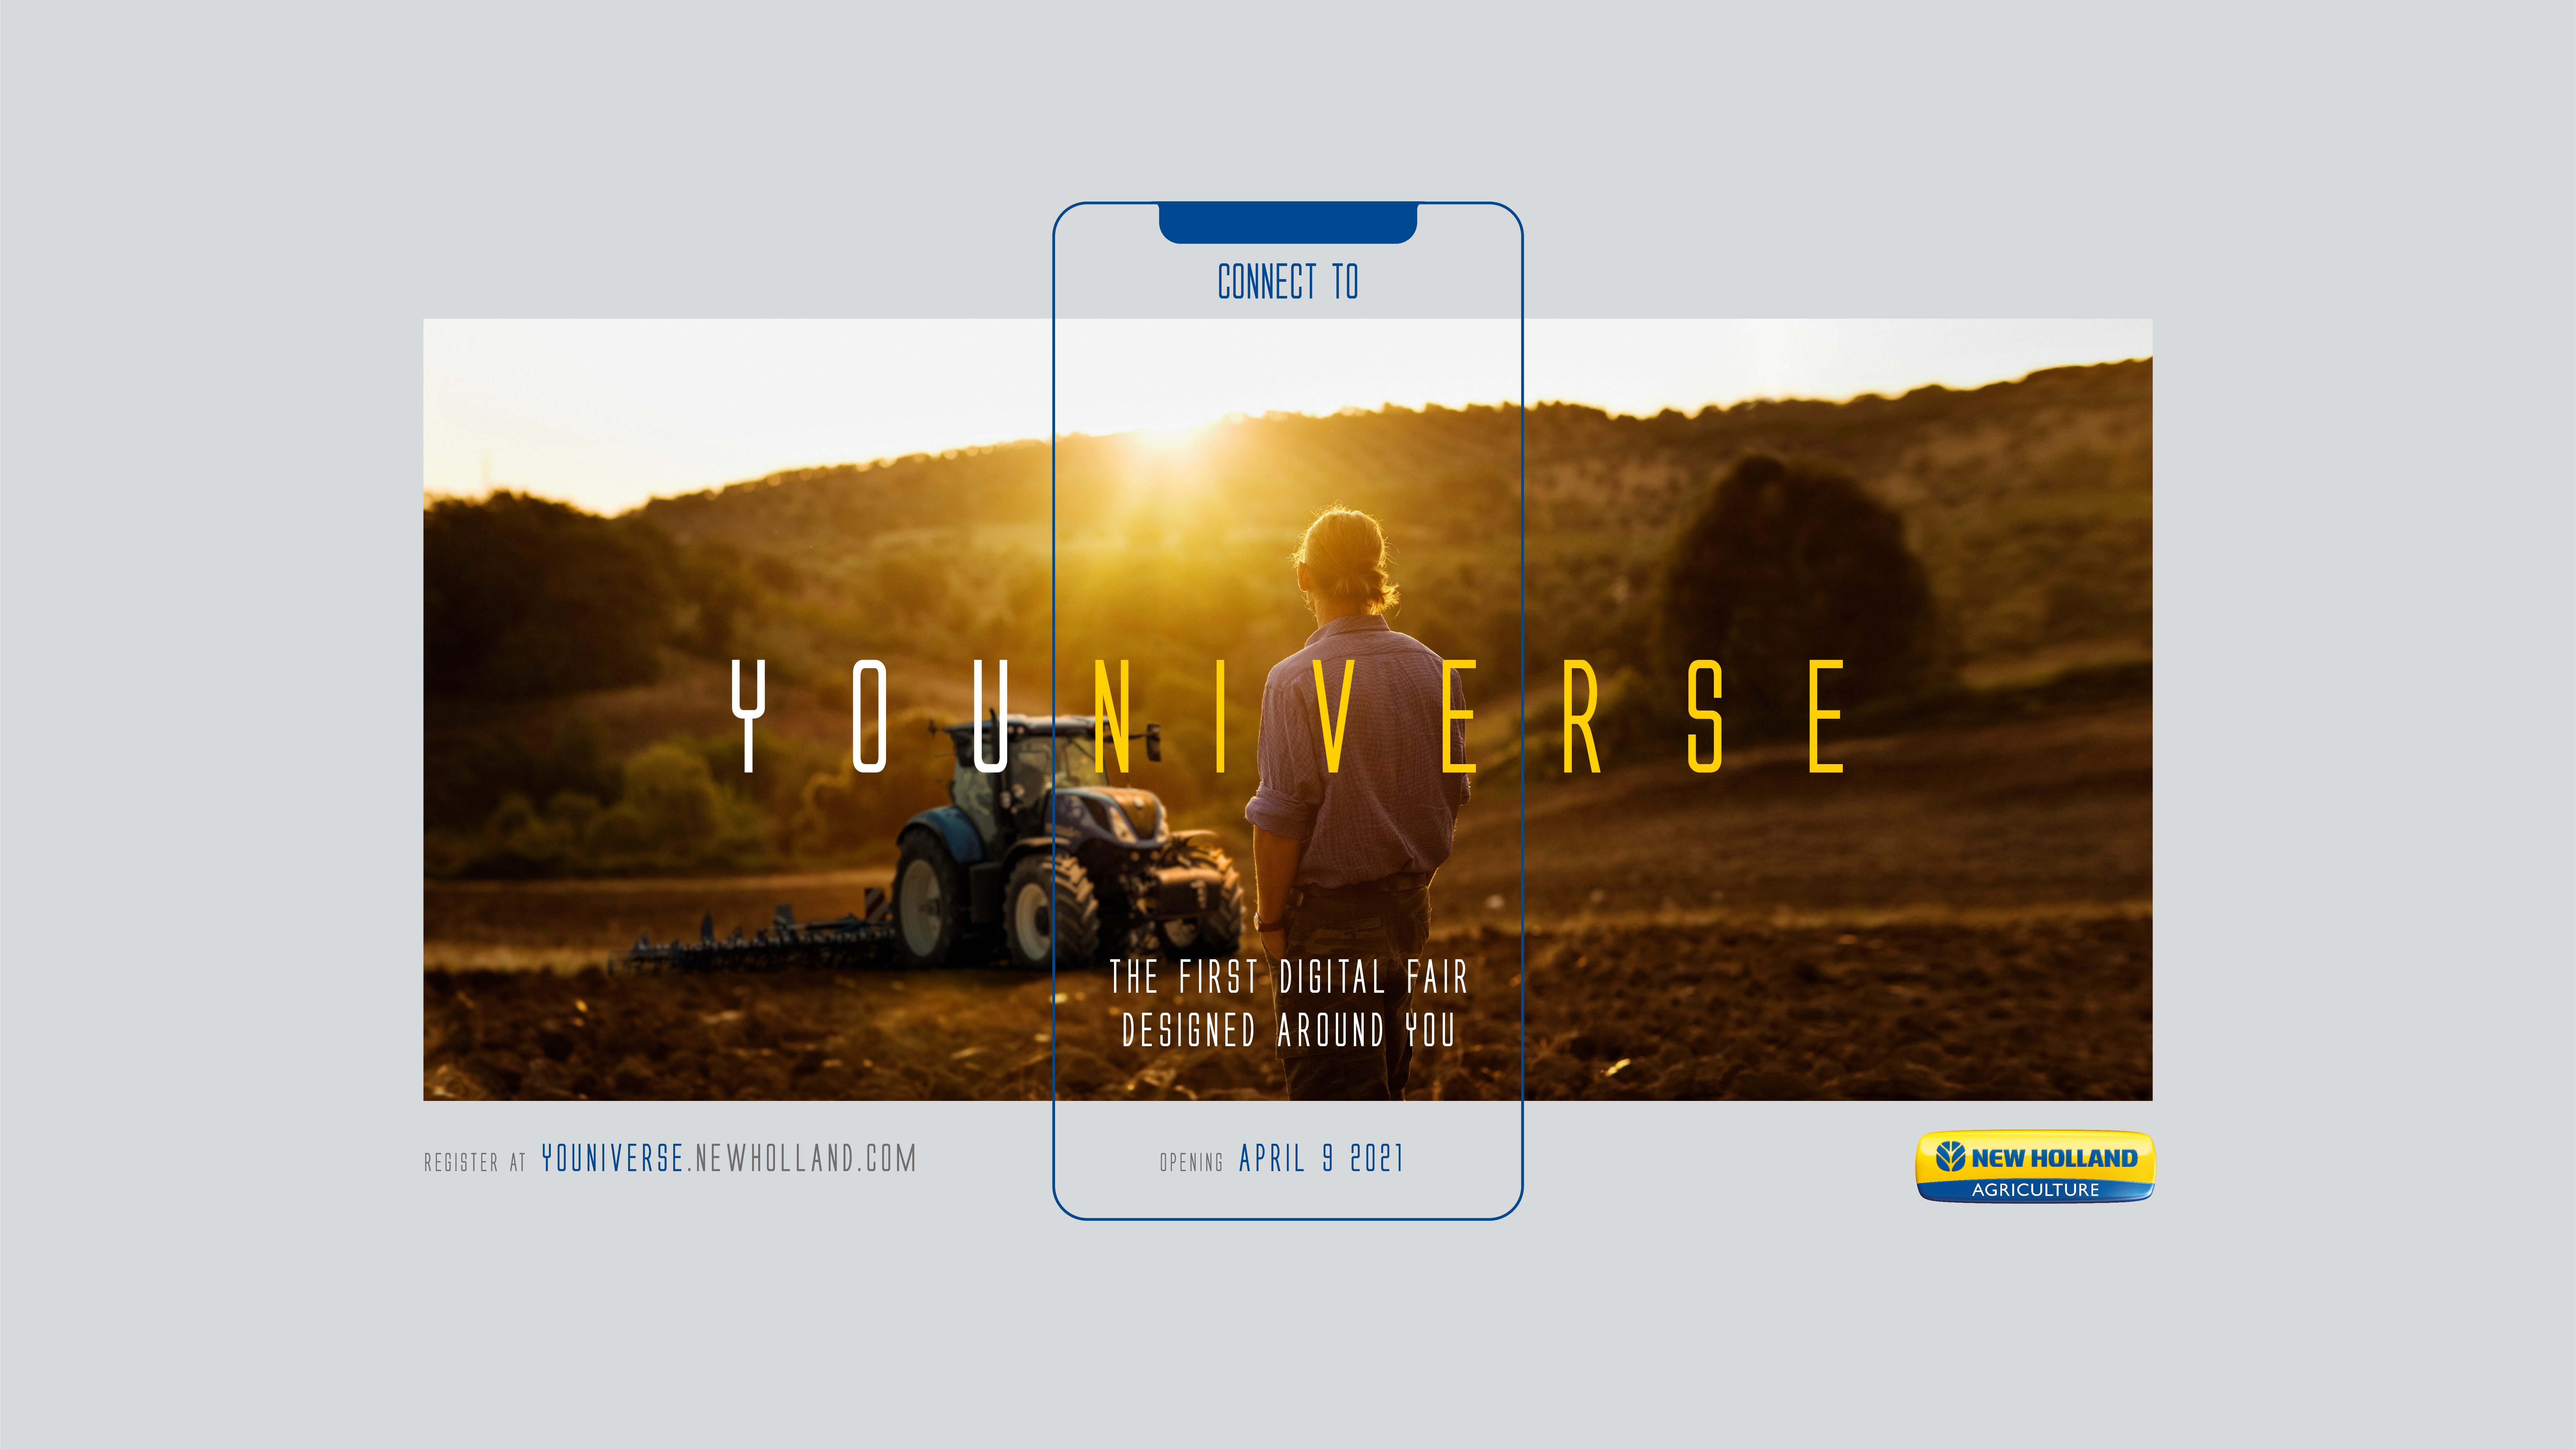 New Holland invites farmers to  an immersive  experience at  YOUNIVERSE digital agricultural fair